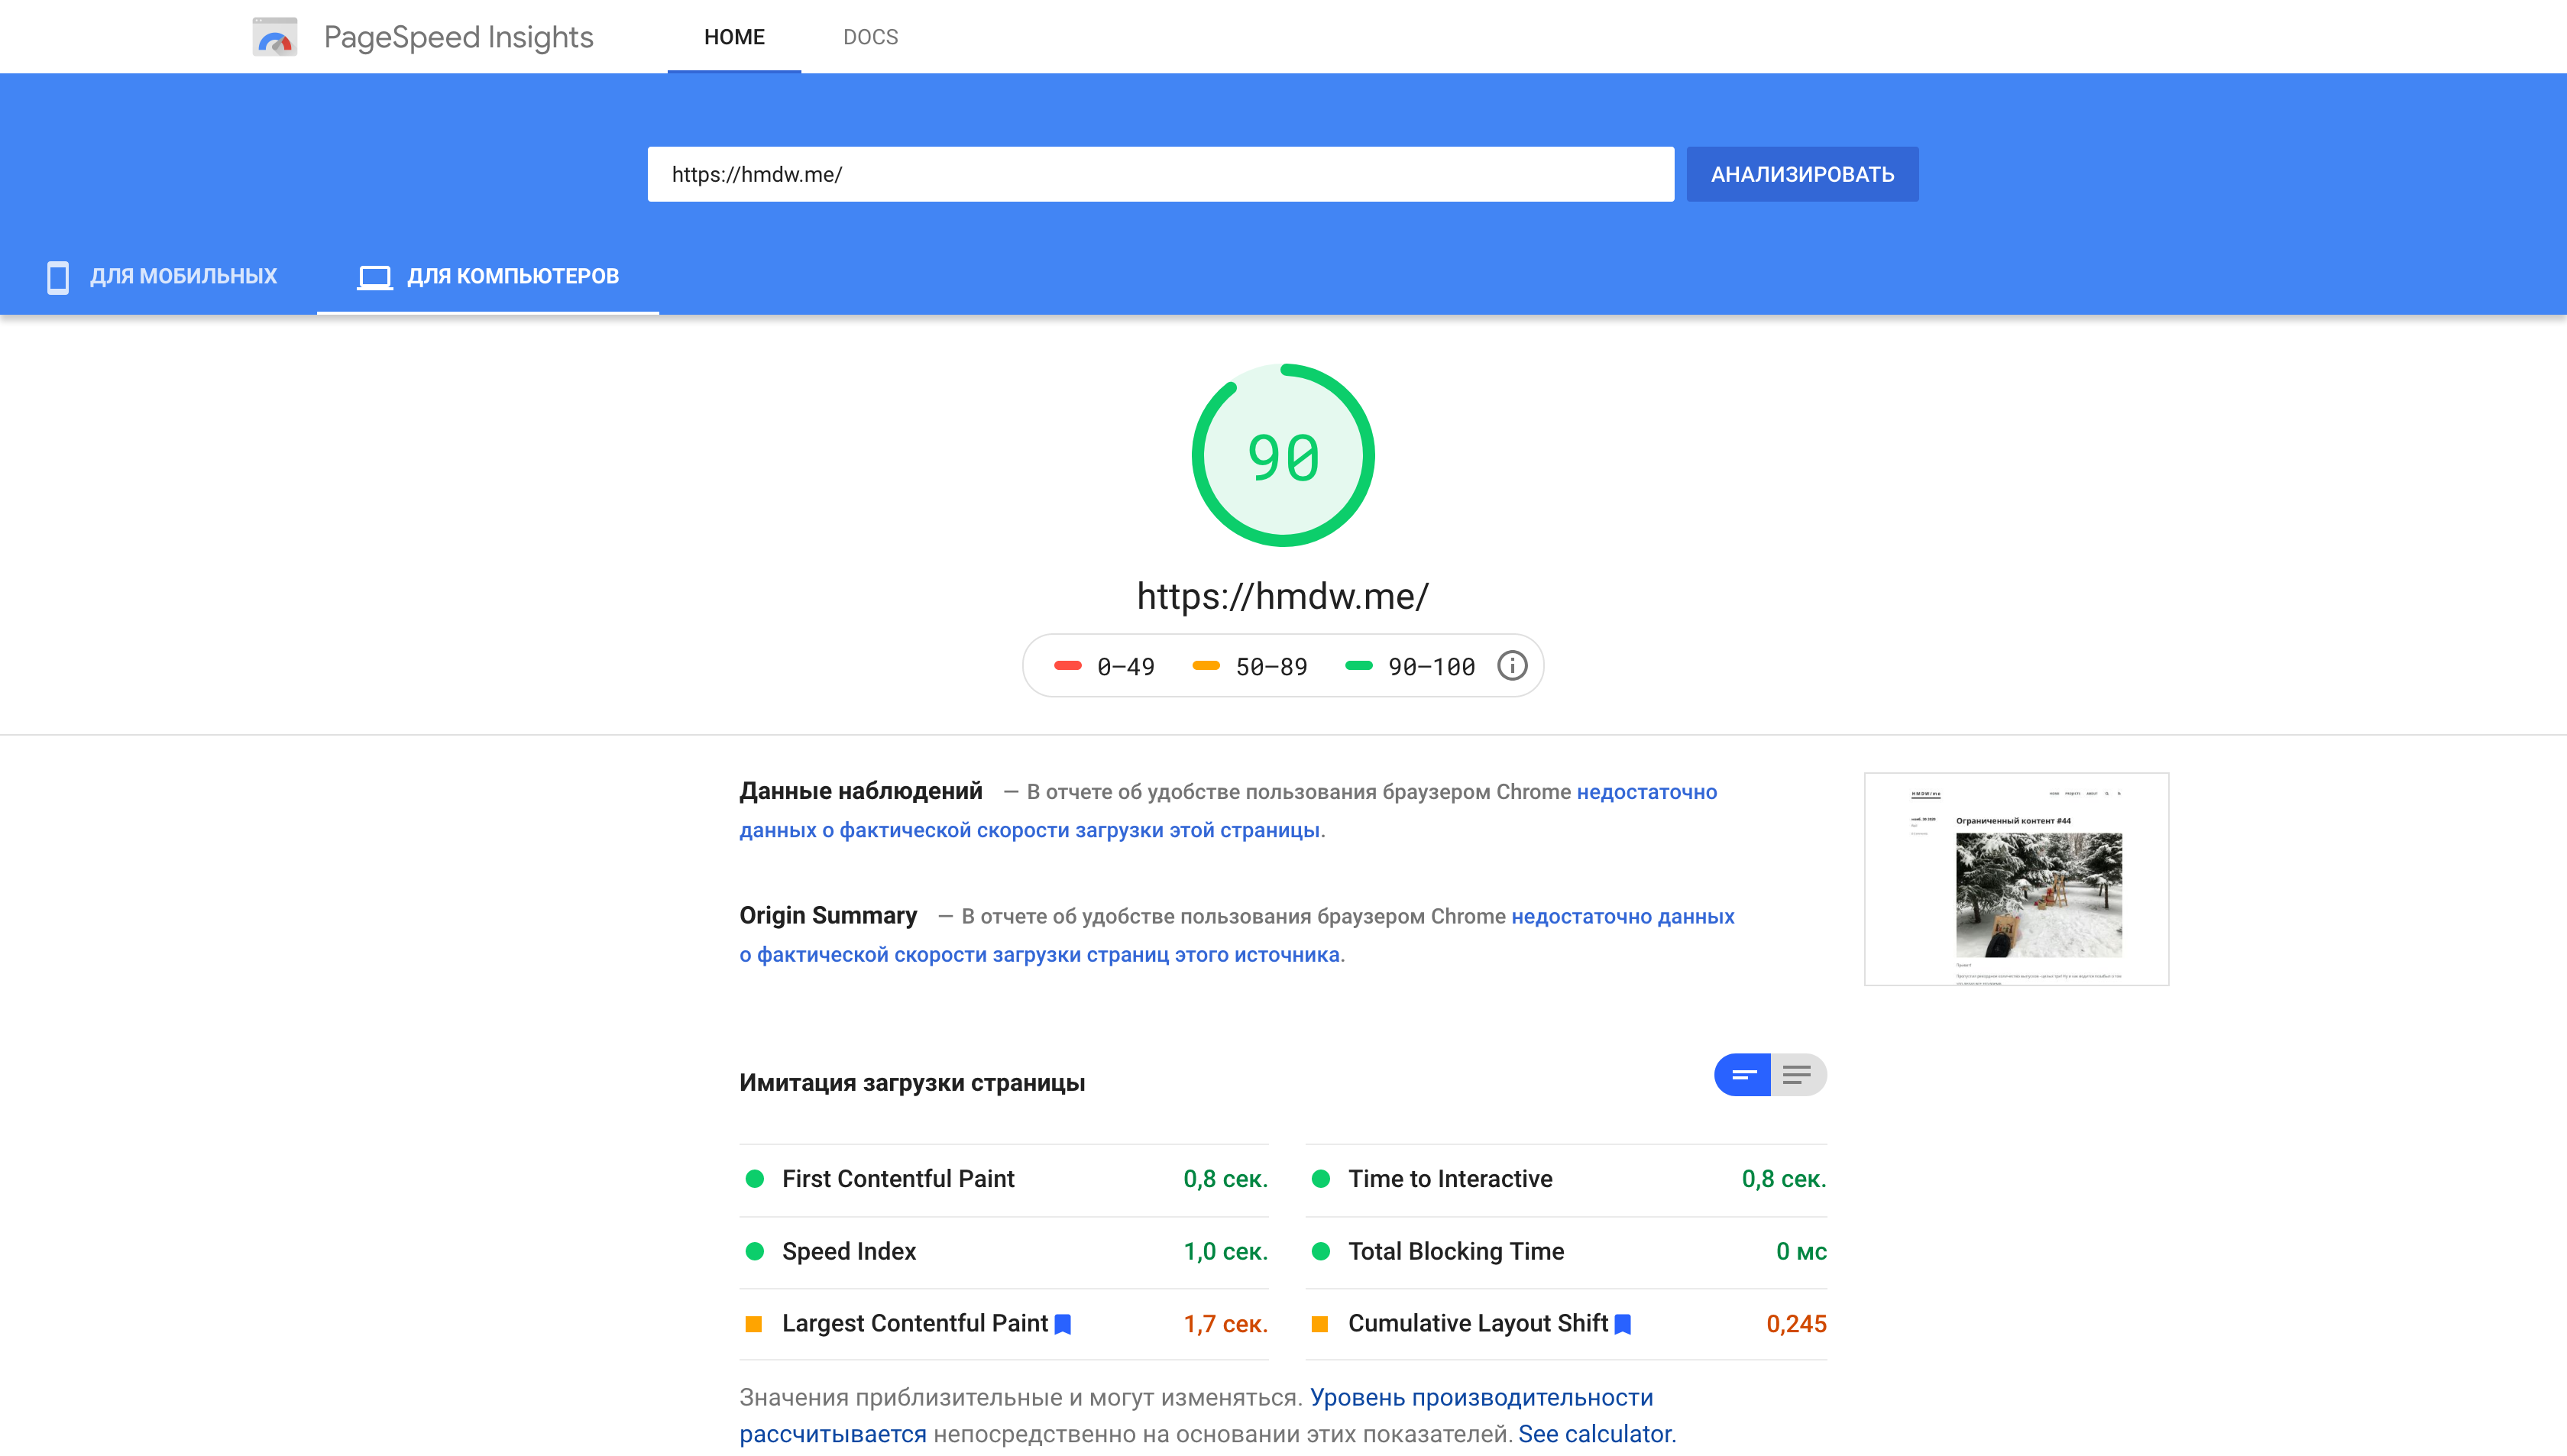 Pagespeed Insights results for desktop, before